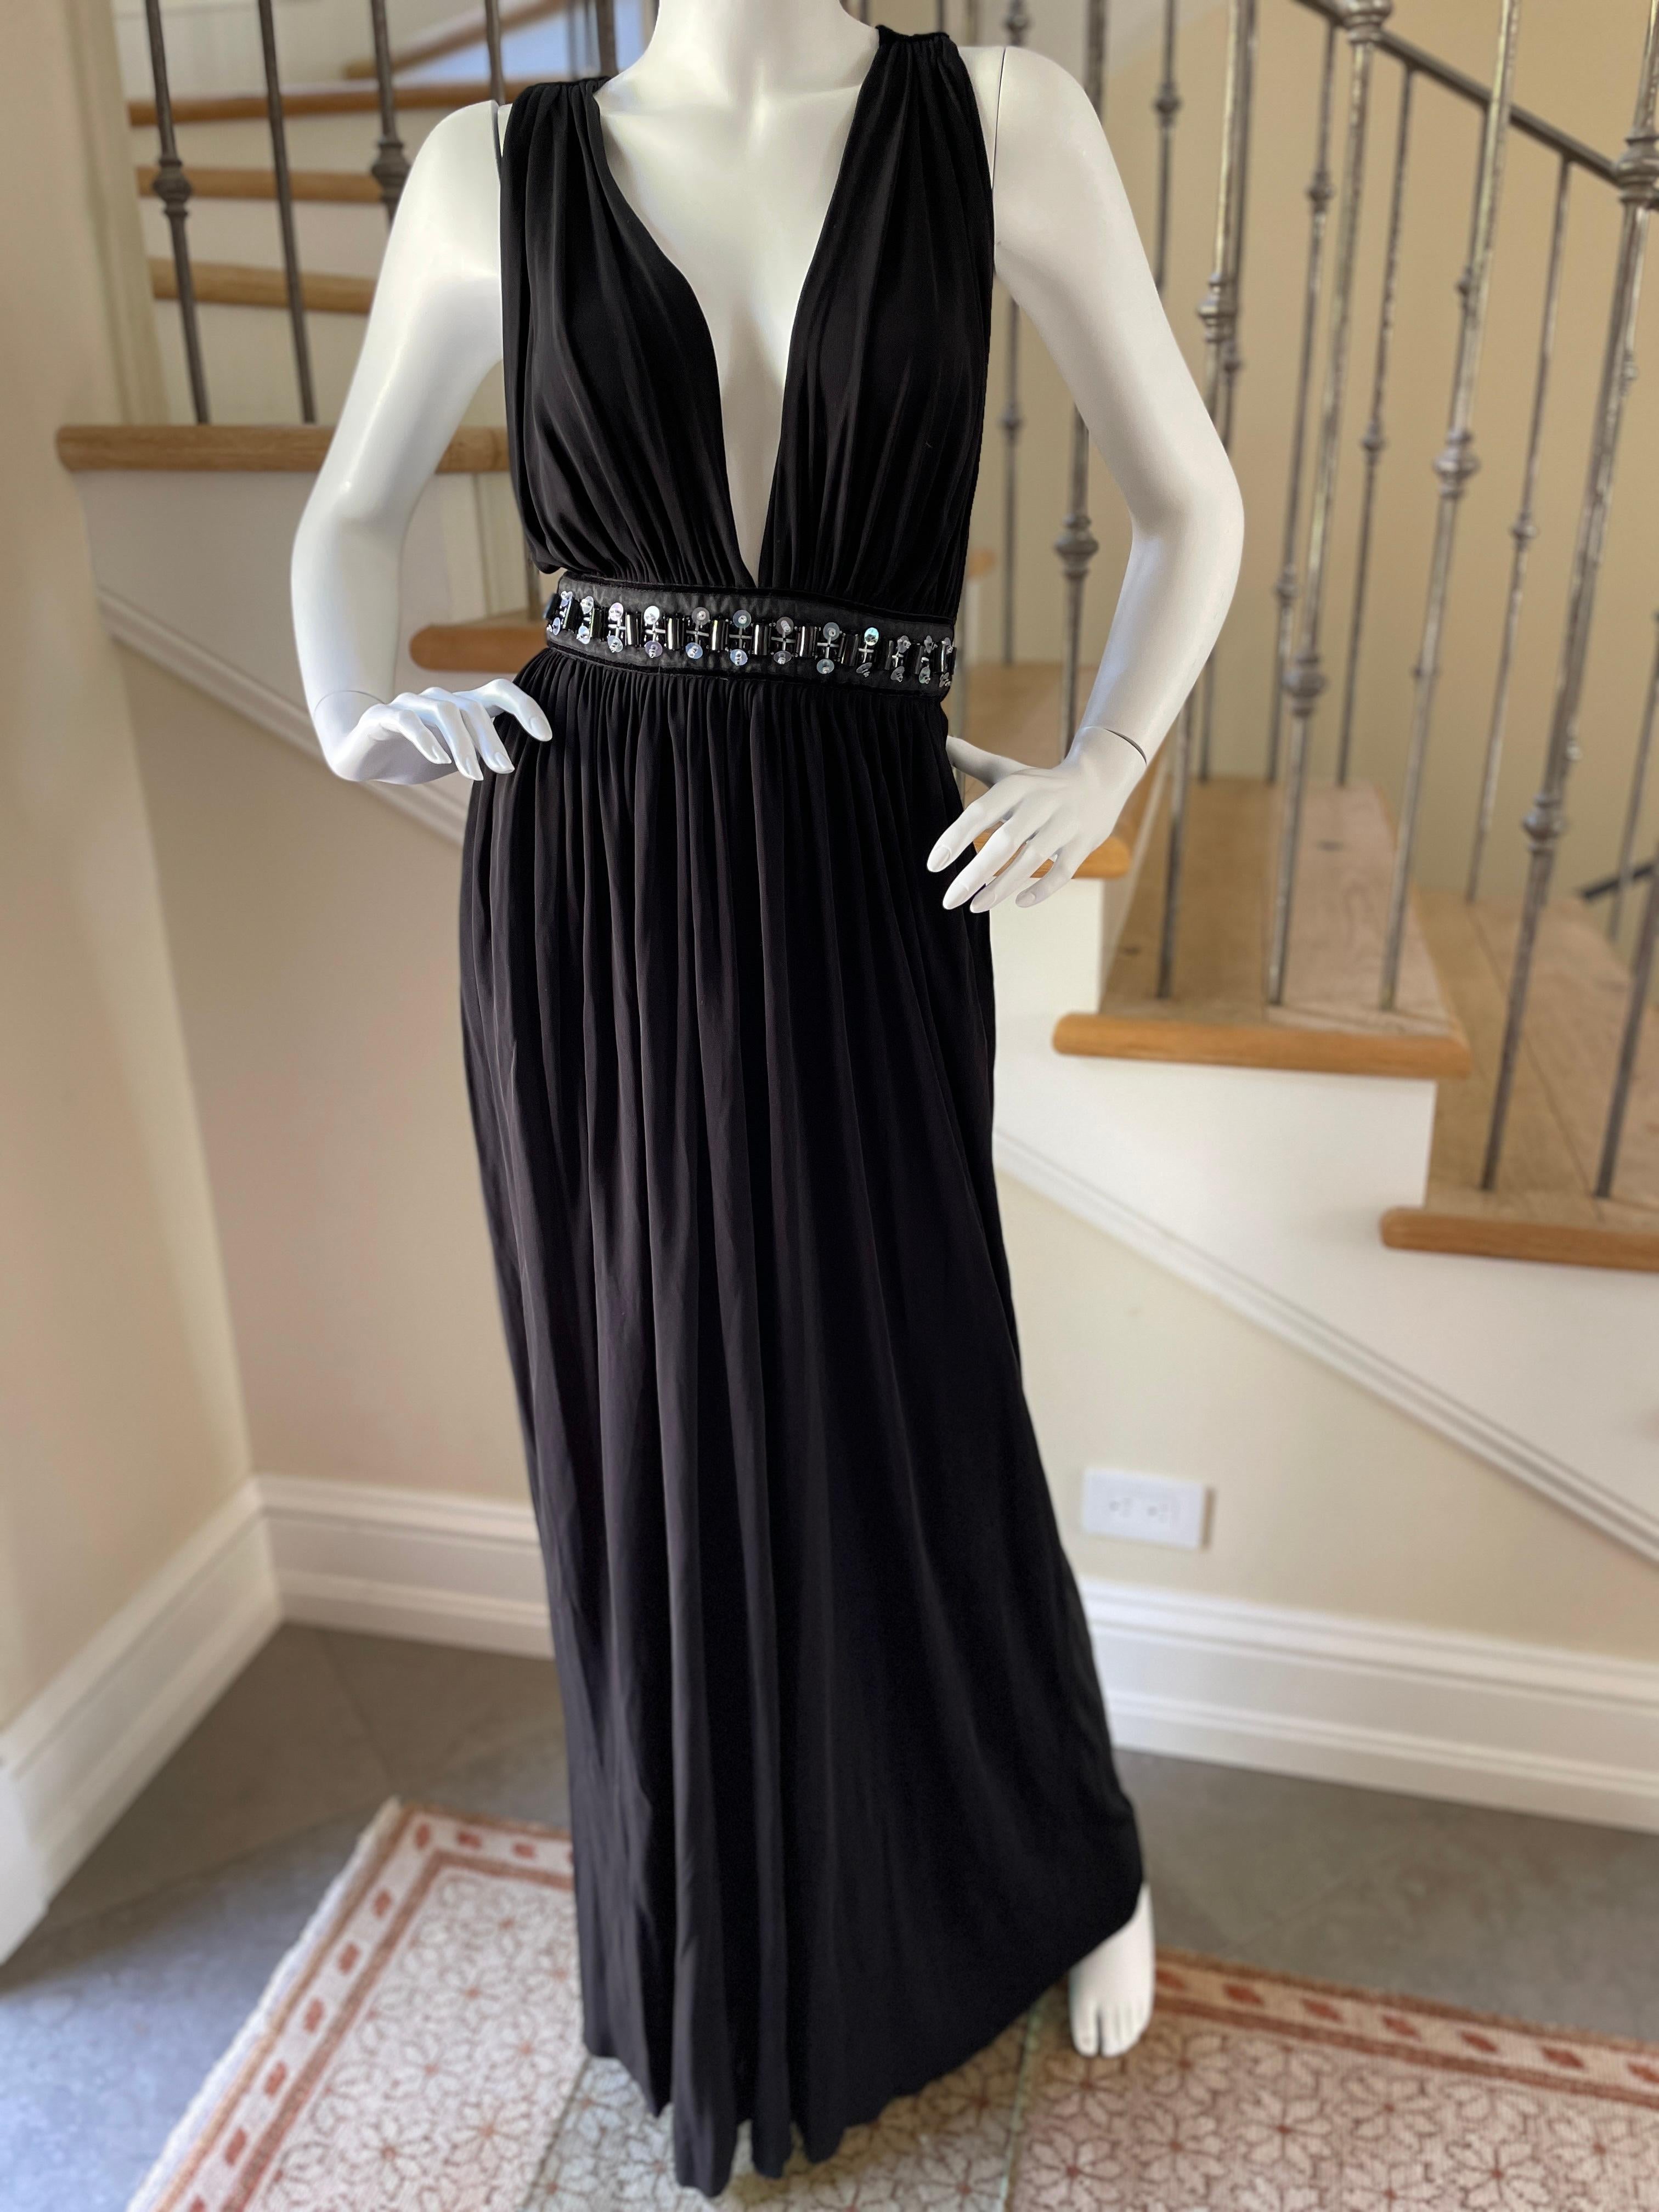 D&G by Dolce & Gabbana Vintage Plunging Black Evening Dress w Embellished Waist In Excellent Condition For Sale In Cloverdale, CA